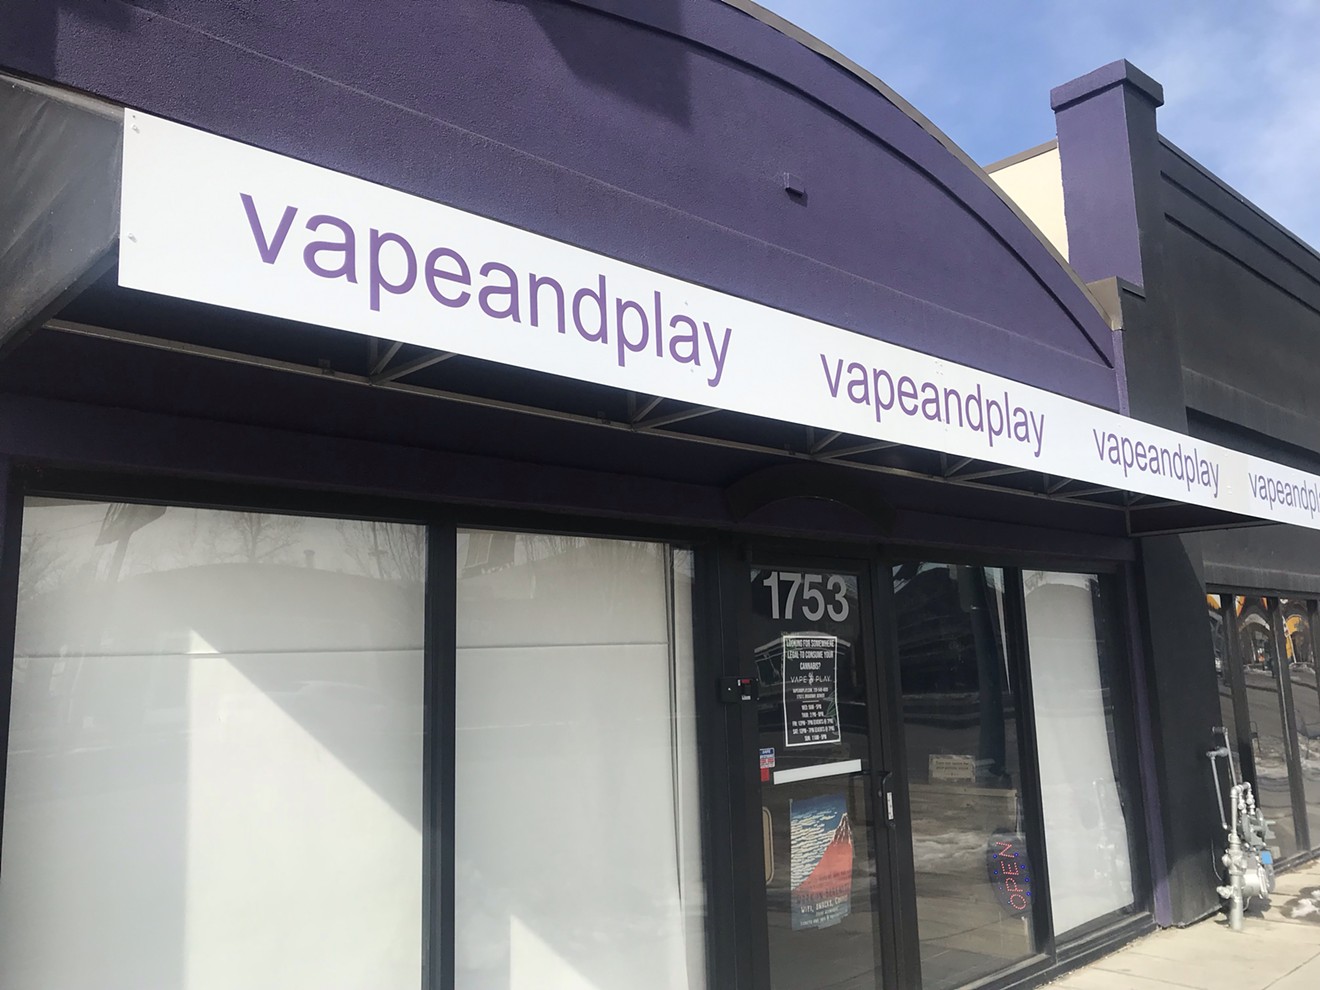 Cannabis lounge Vape and Play will reopen at 1753 South Broadway after partnering with Dean Ween's business group.